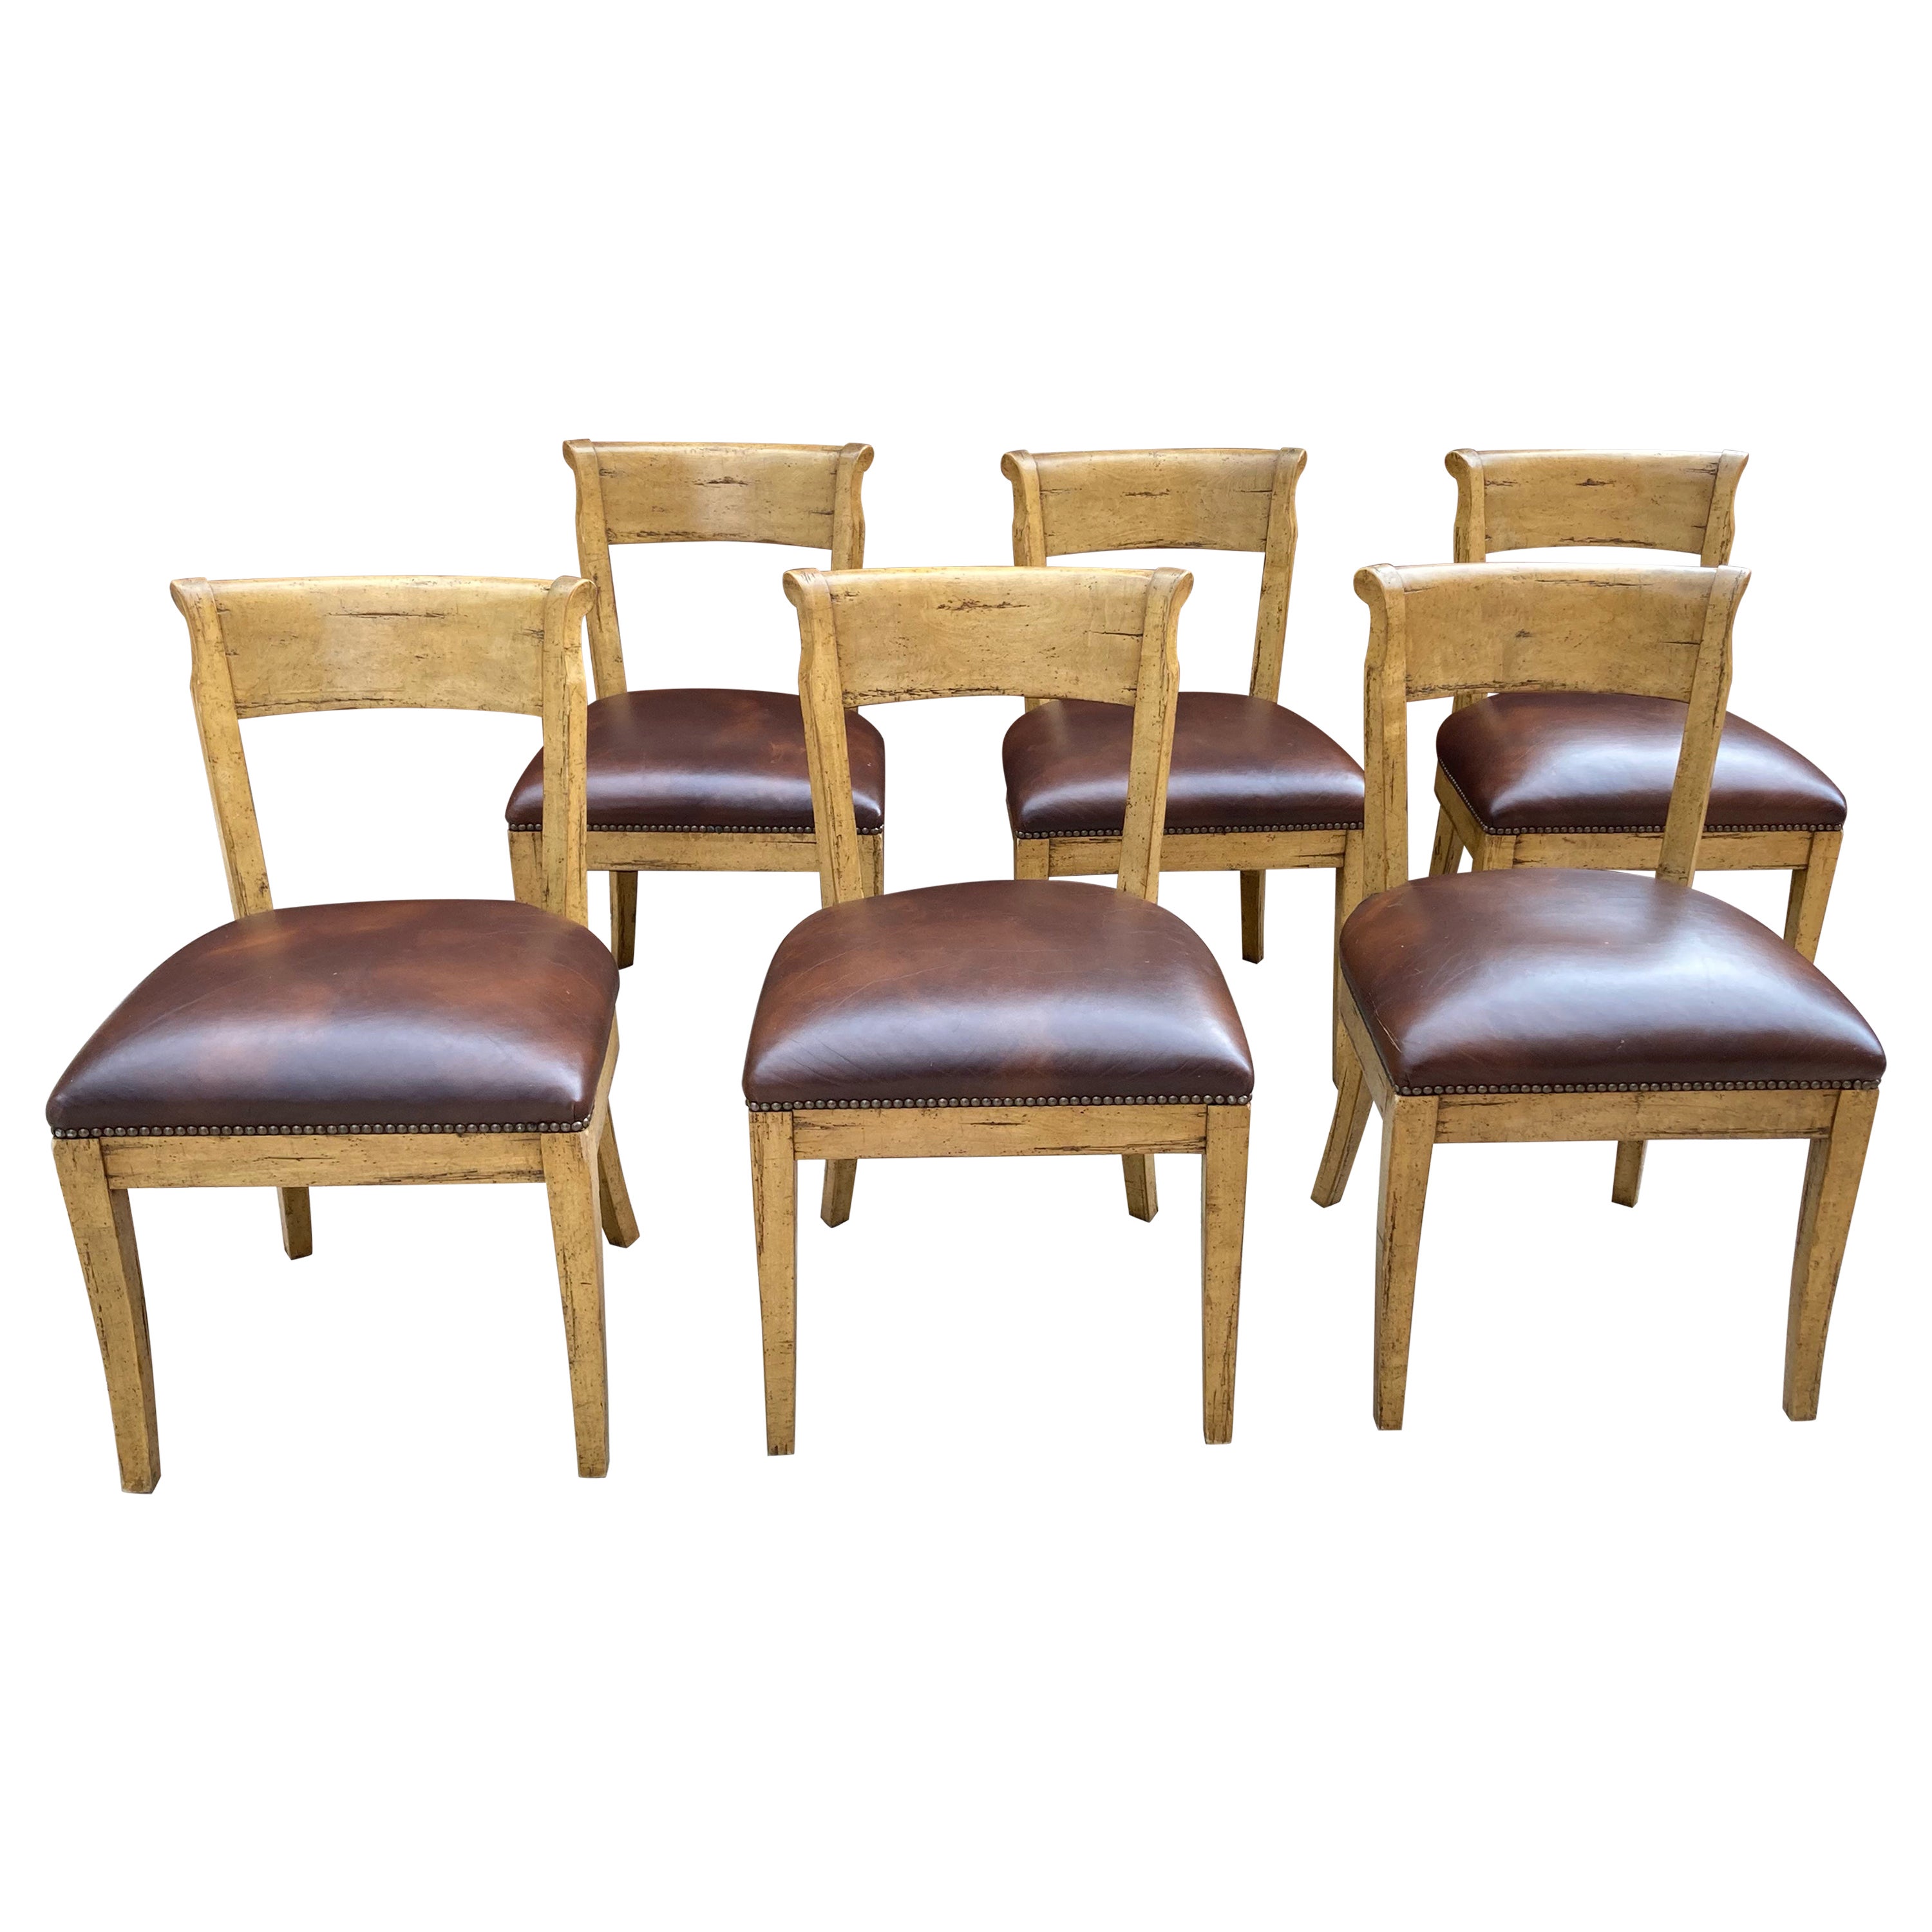 Fantastic set of 8 Guy Chaddock country French style chairs with beech wood frames and leather seats. 6 side chairs and 2 arm. 
Good condition with some blemishes on seat leather as shown in close-ups. No rips or tears, only a scrape here and there